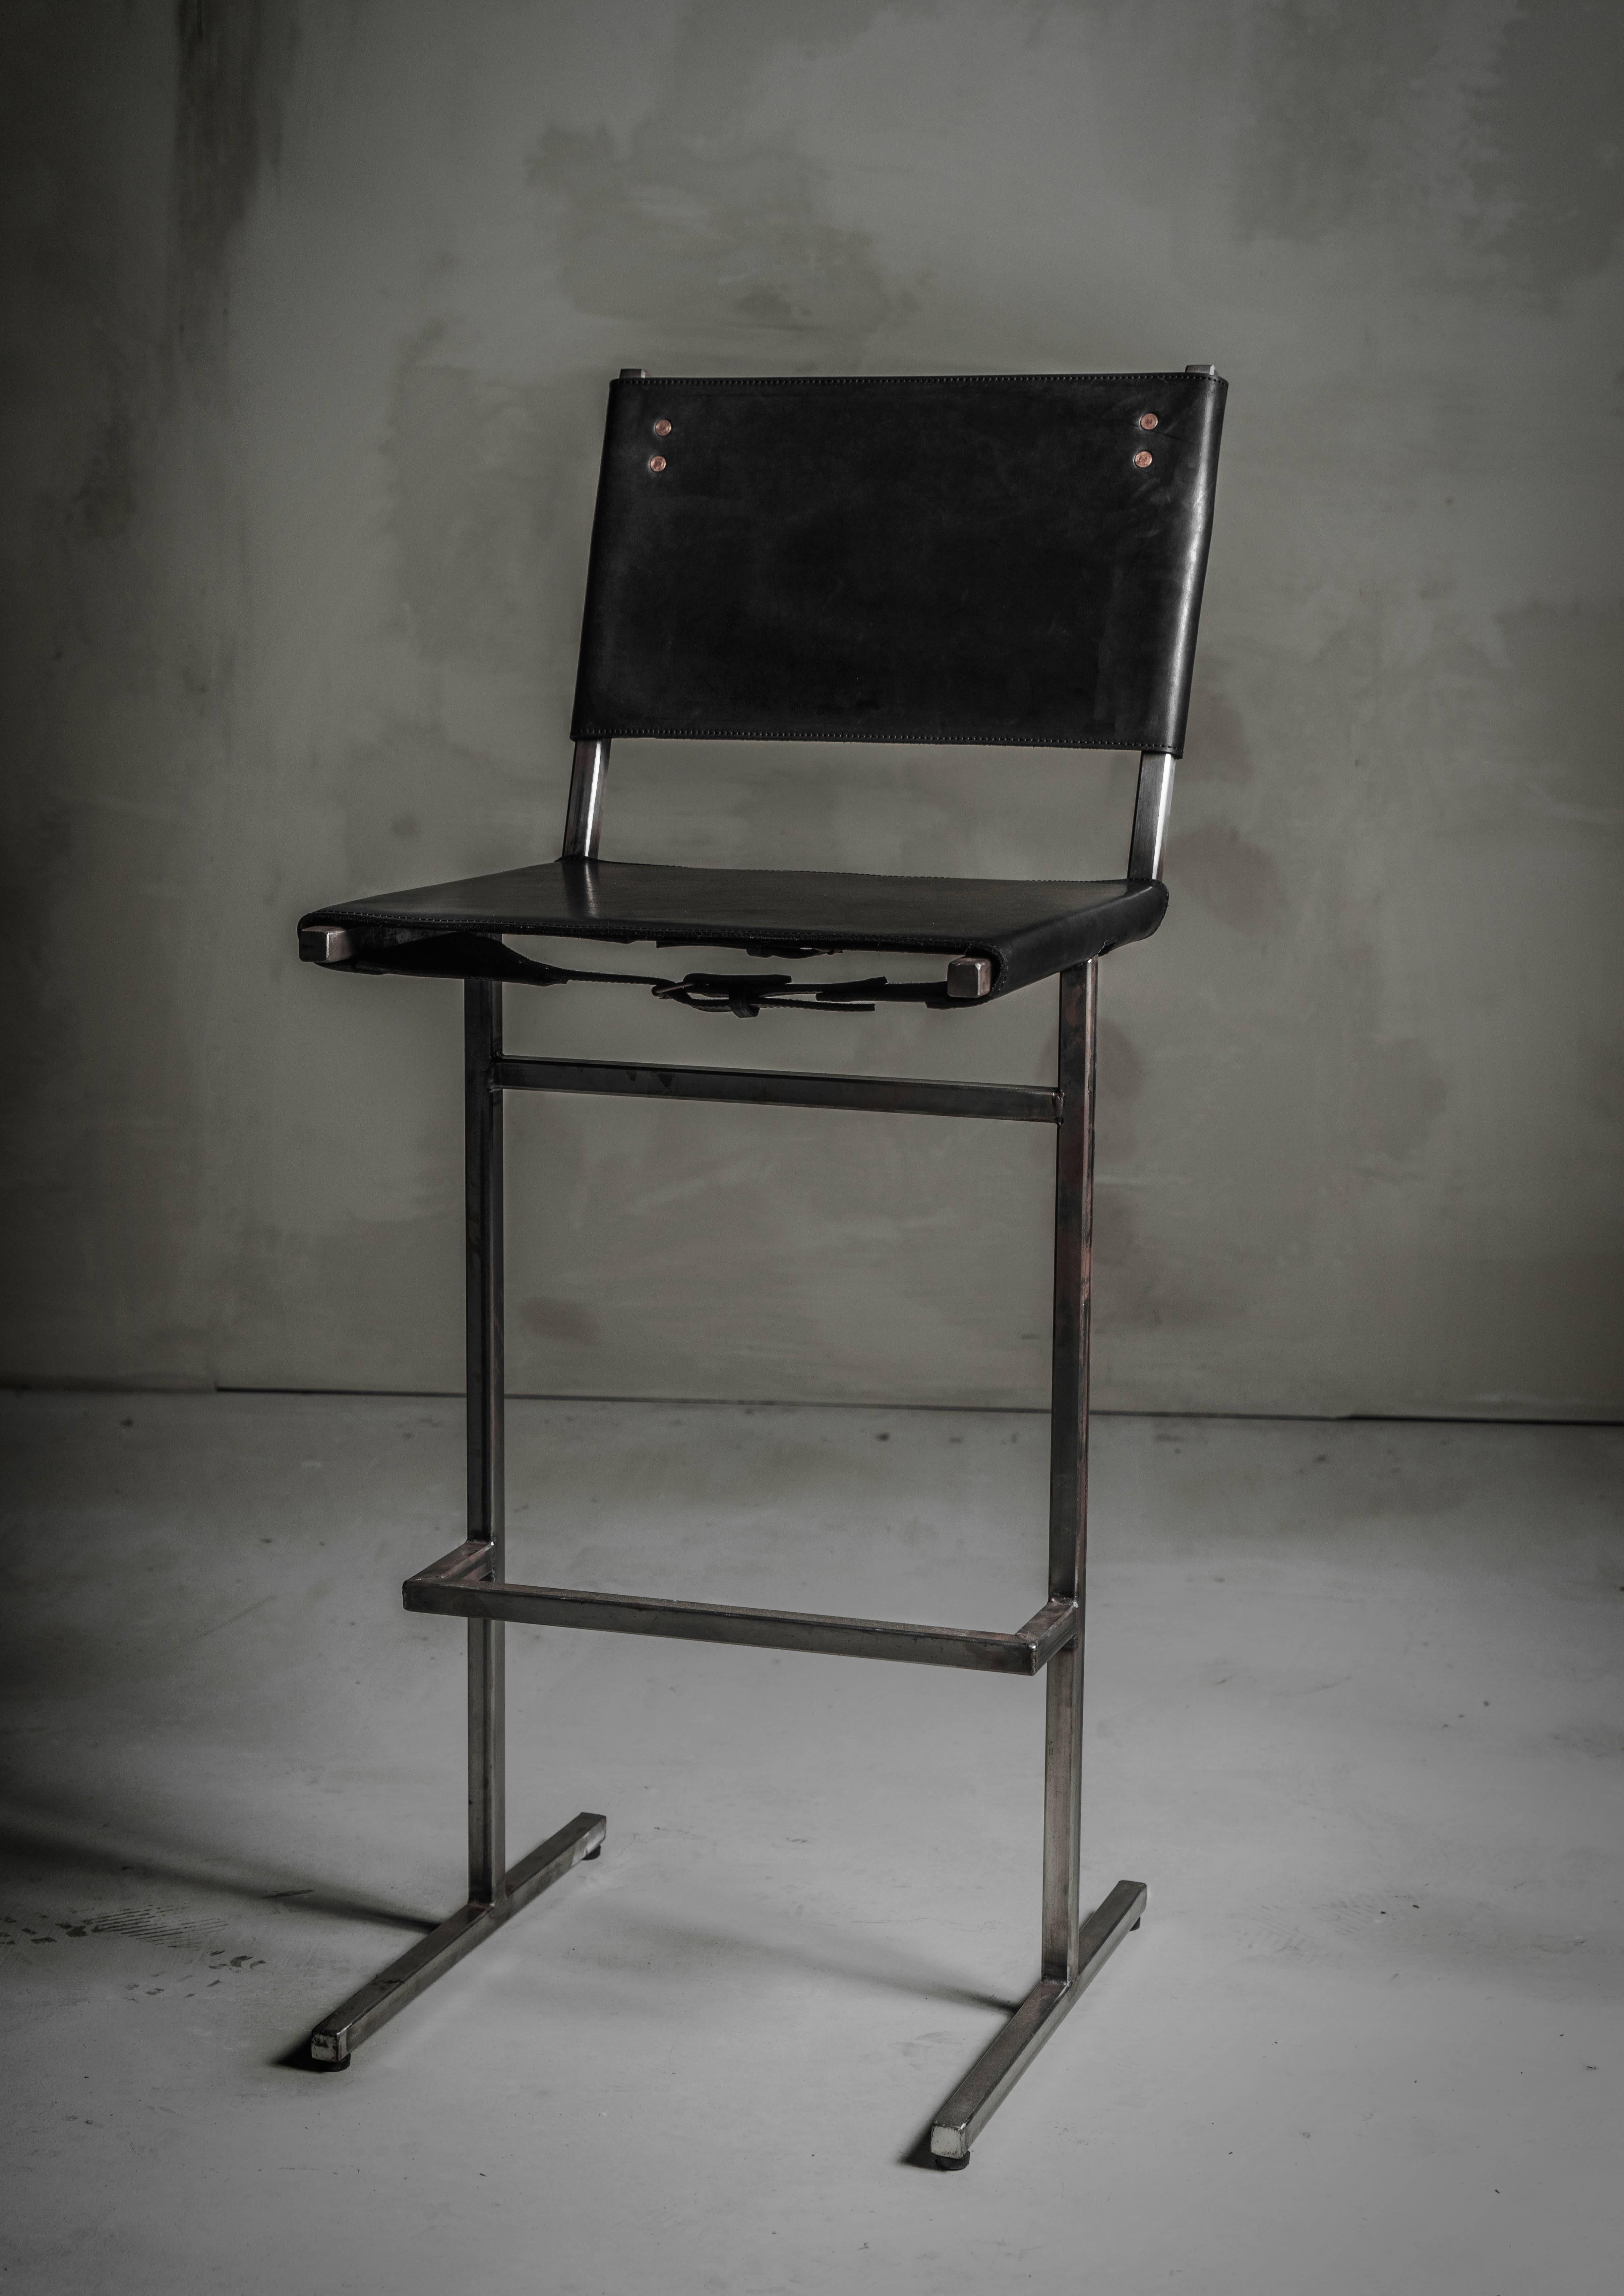 Memento Barstool - Jesse Sanderson, WDSTCK Studio
Original signed chair by Jesse Sanderson.
Dimensions: 106 x 40 x 45 cm.
Seat height: 70 cm.

With a sturdy oak school chair from the 1950s in mind,
Sanderson takes us back to his childhood and